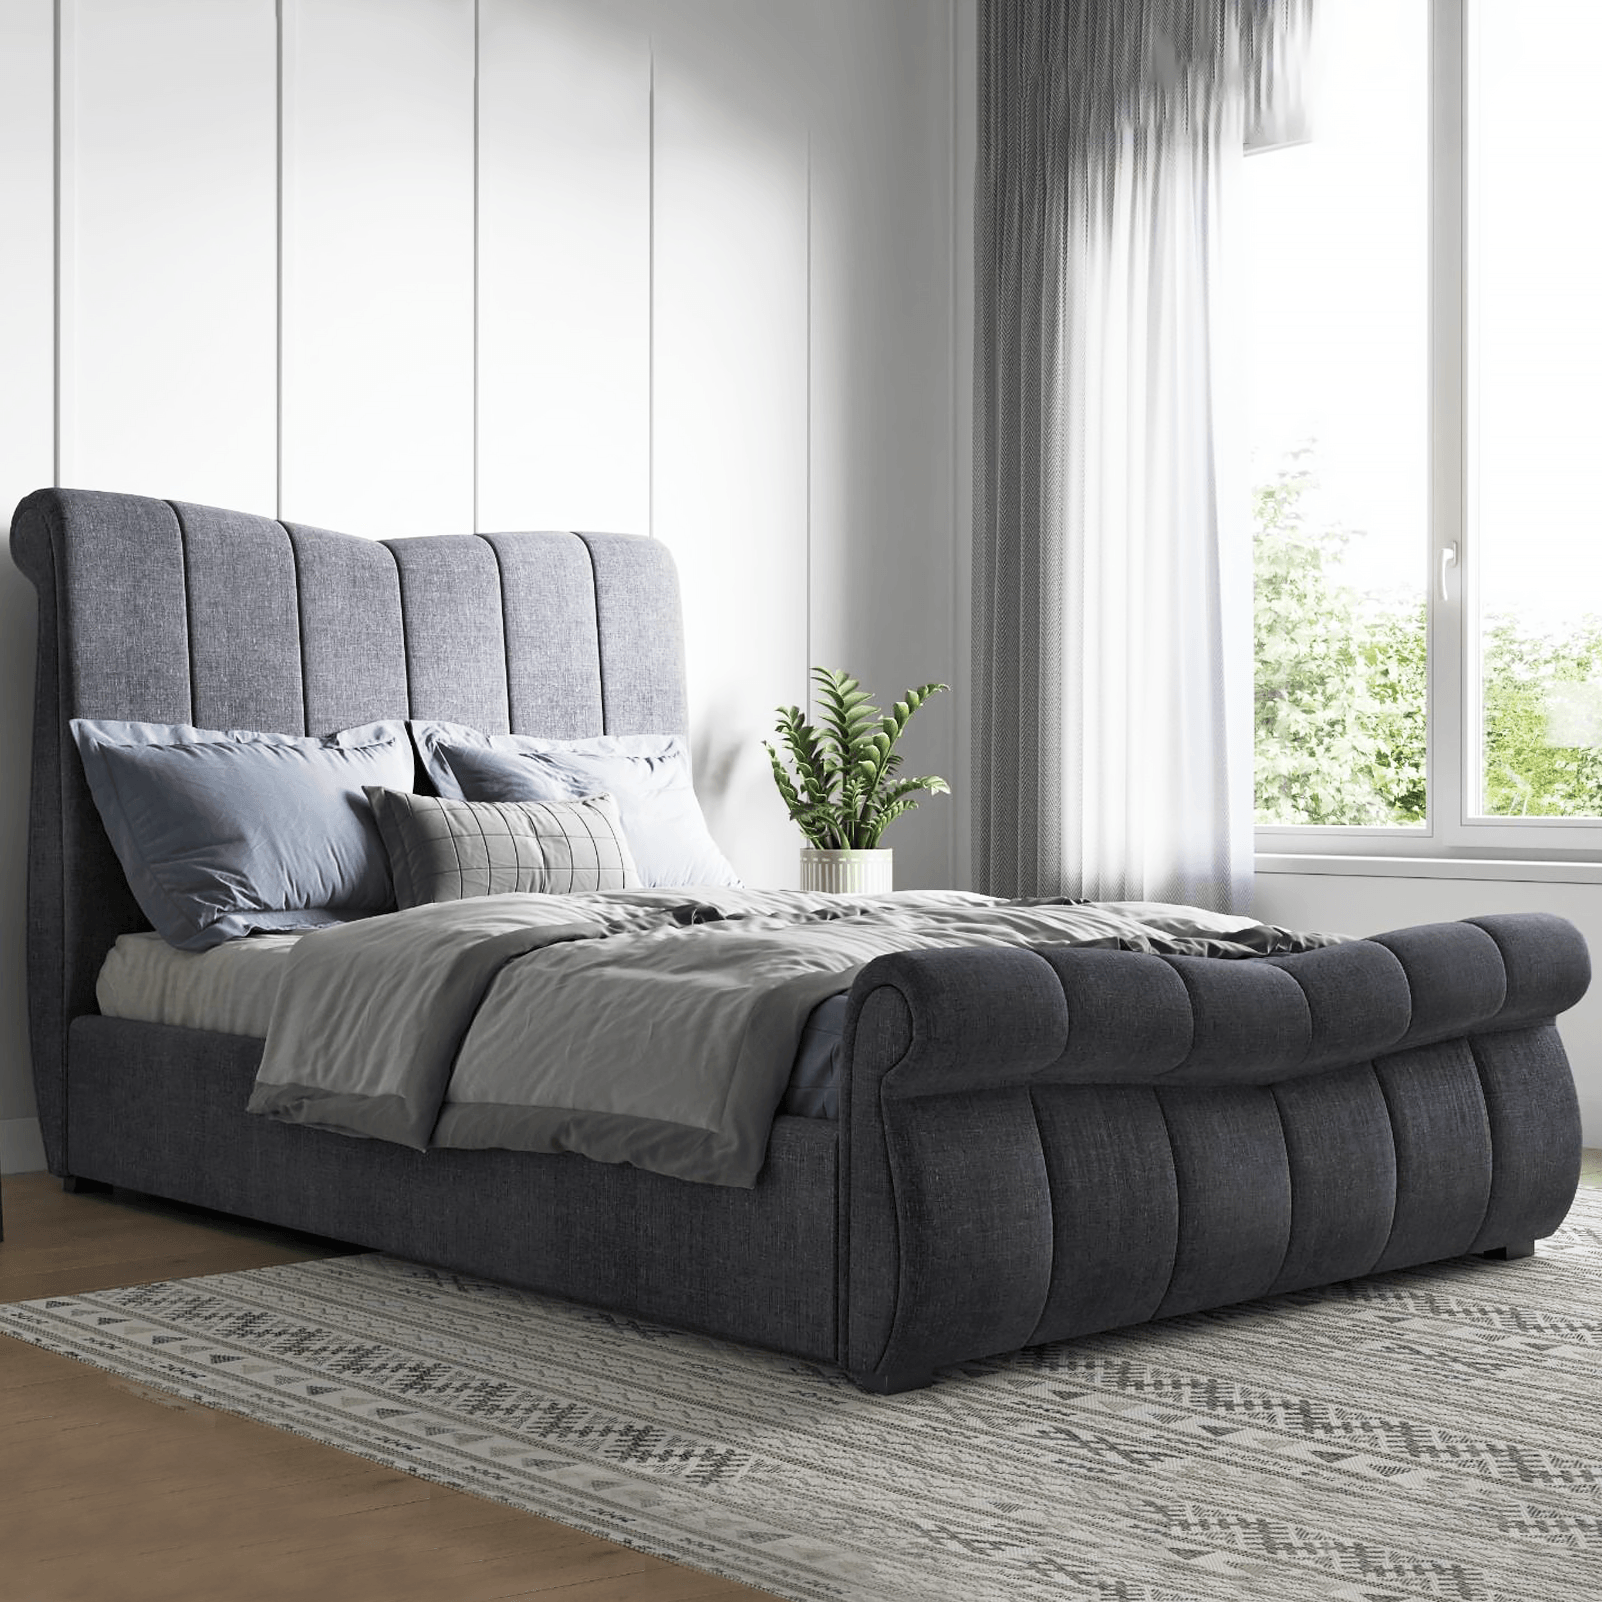 Kylo End Lift Grey Double Bed Frame